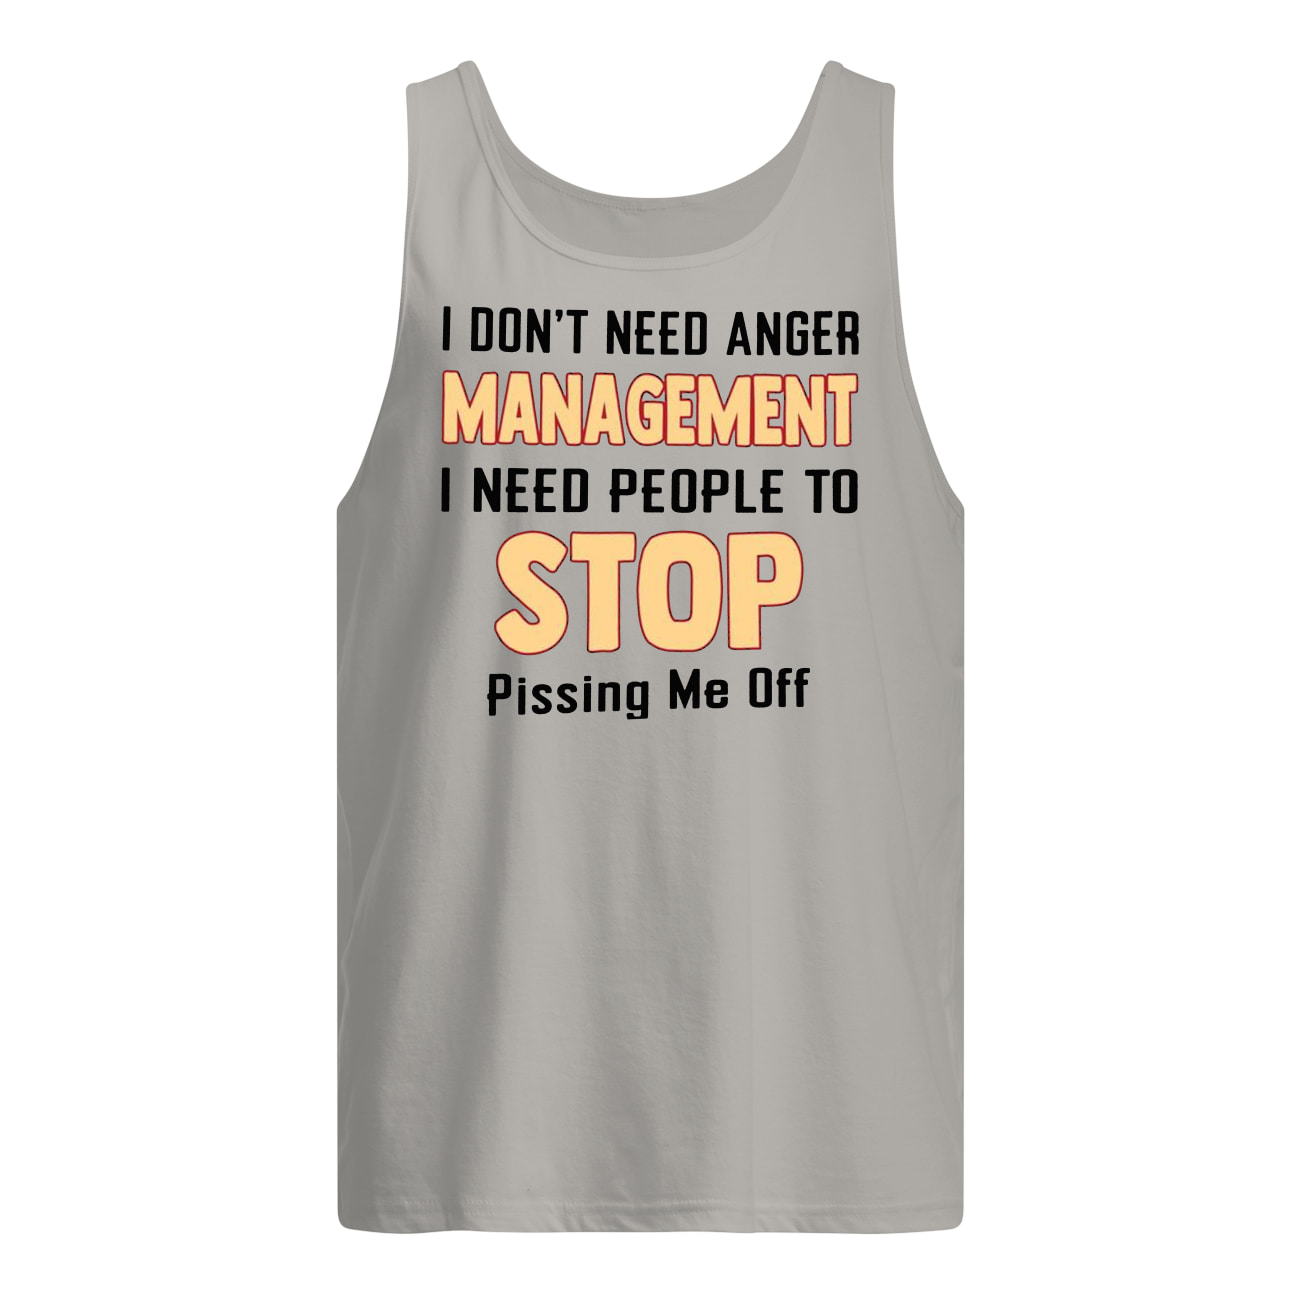 I don't need anger management I need people to stop pissing me off tank top